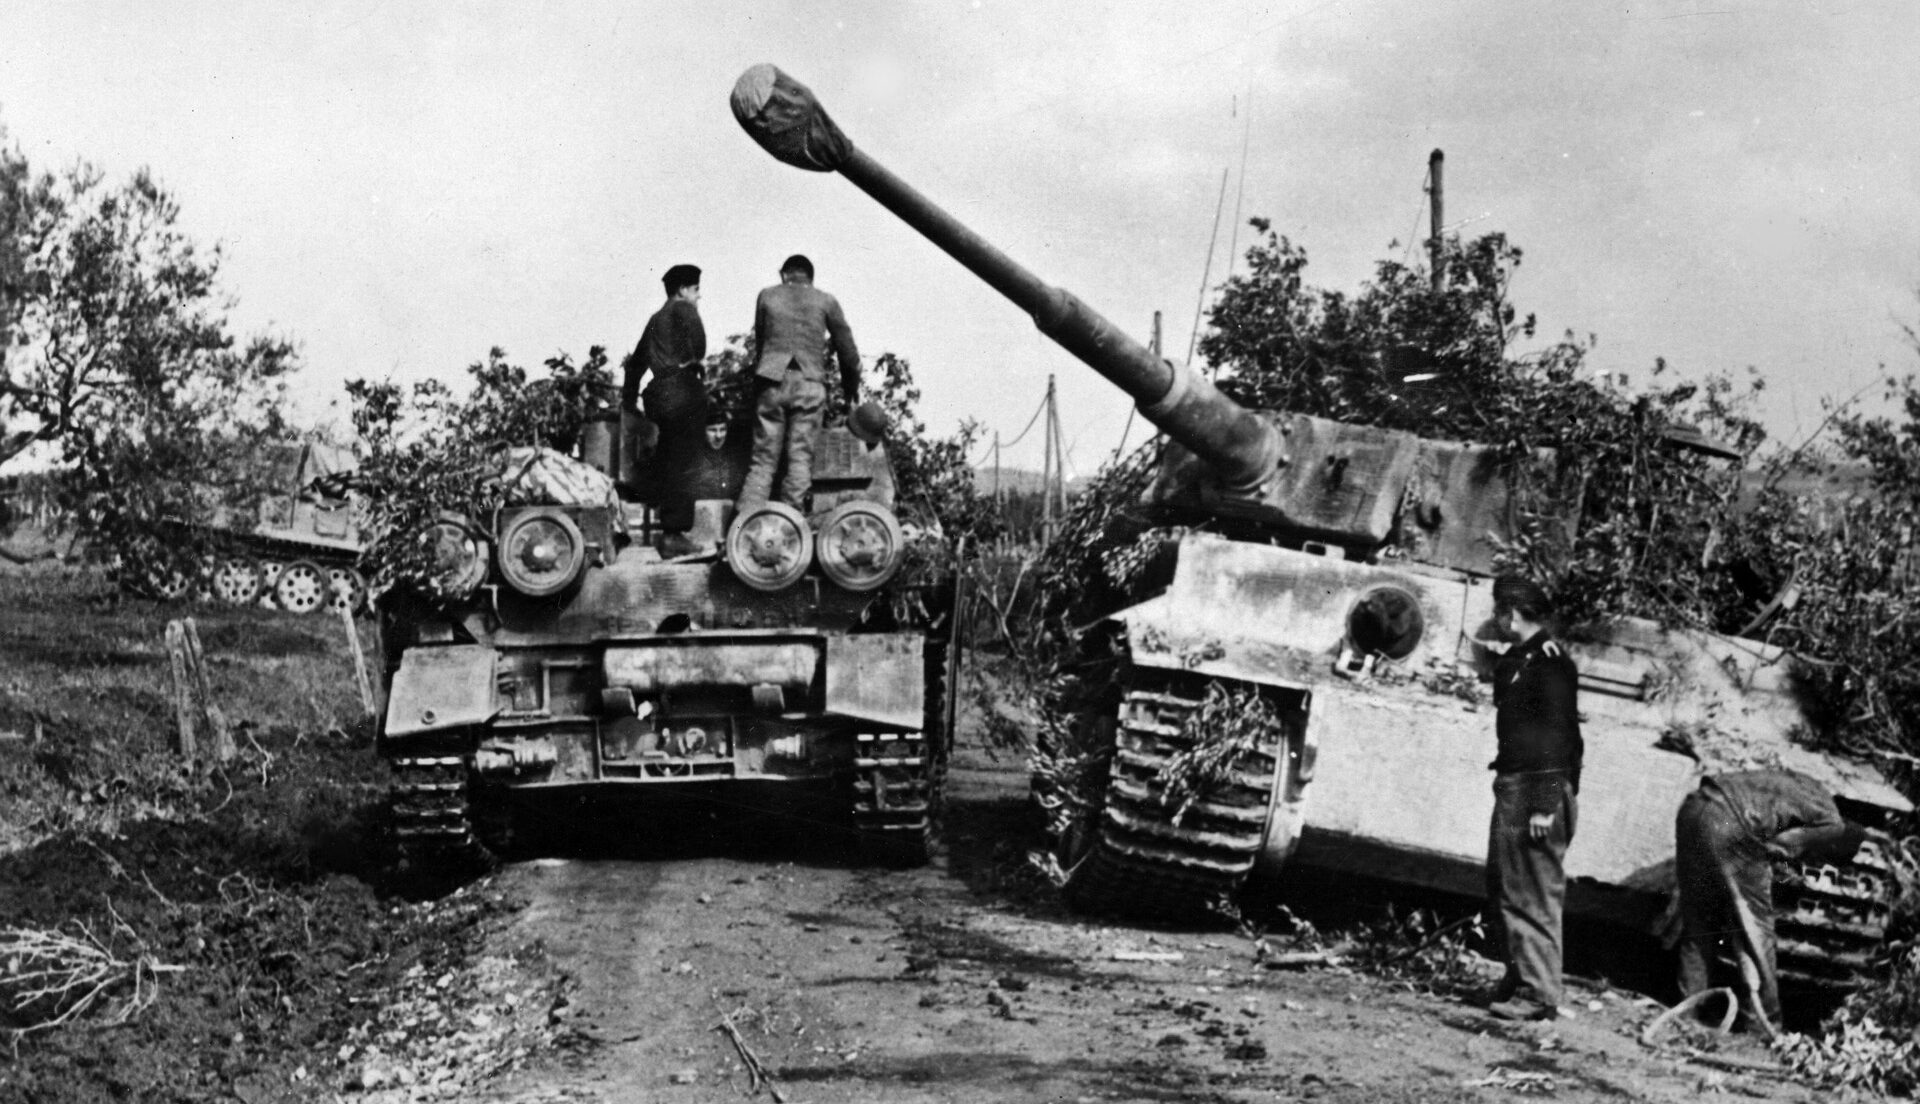 A German kampfgruppe uses camouflage in an attempt to conceal itself from Allied aircraft. German armor assets included the formidable Panzerkampfwagen VI Tiger I (at right) with its deadly 88mm gun. 